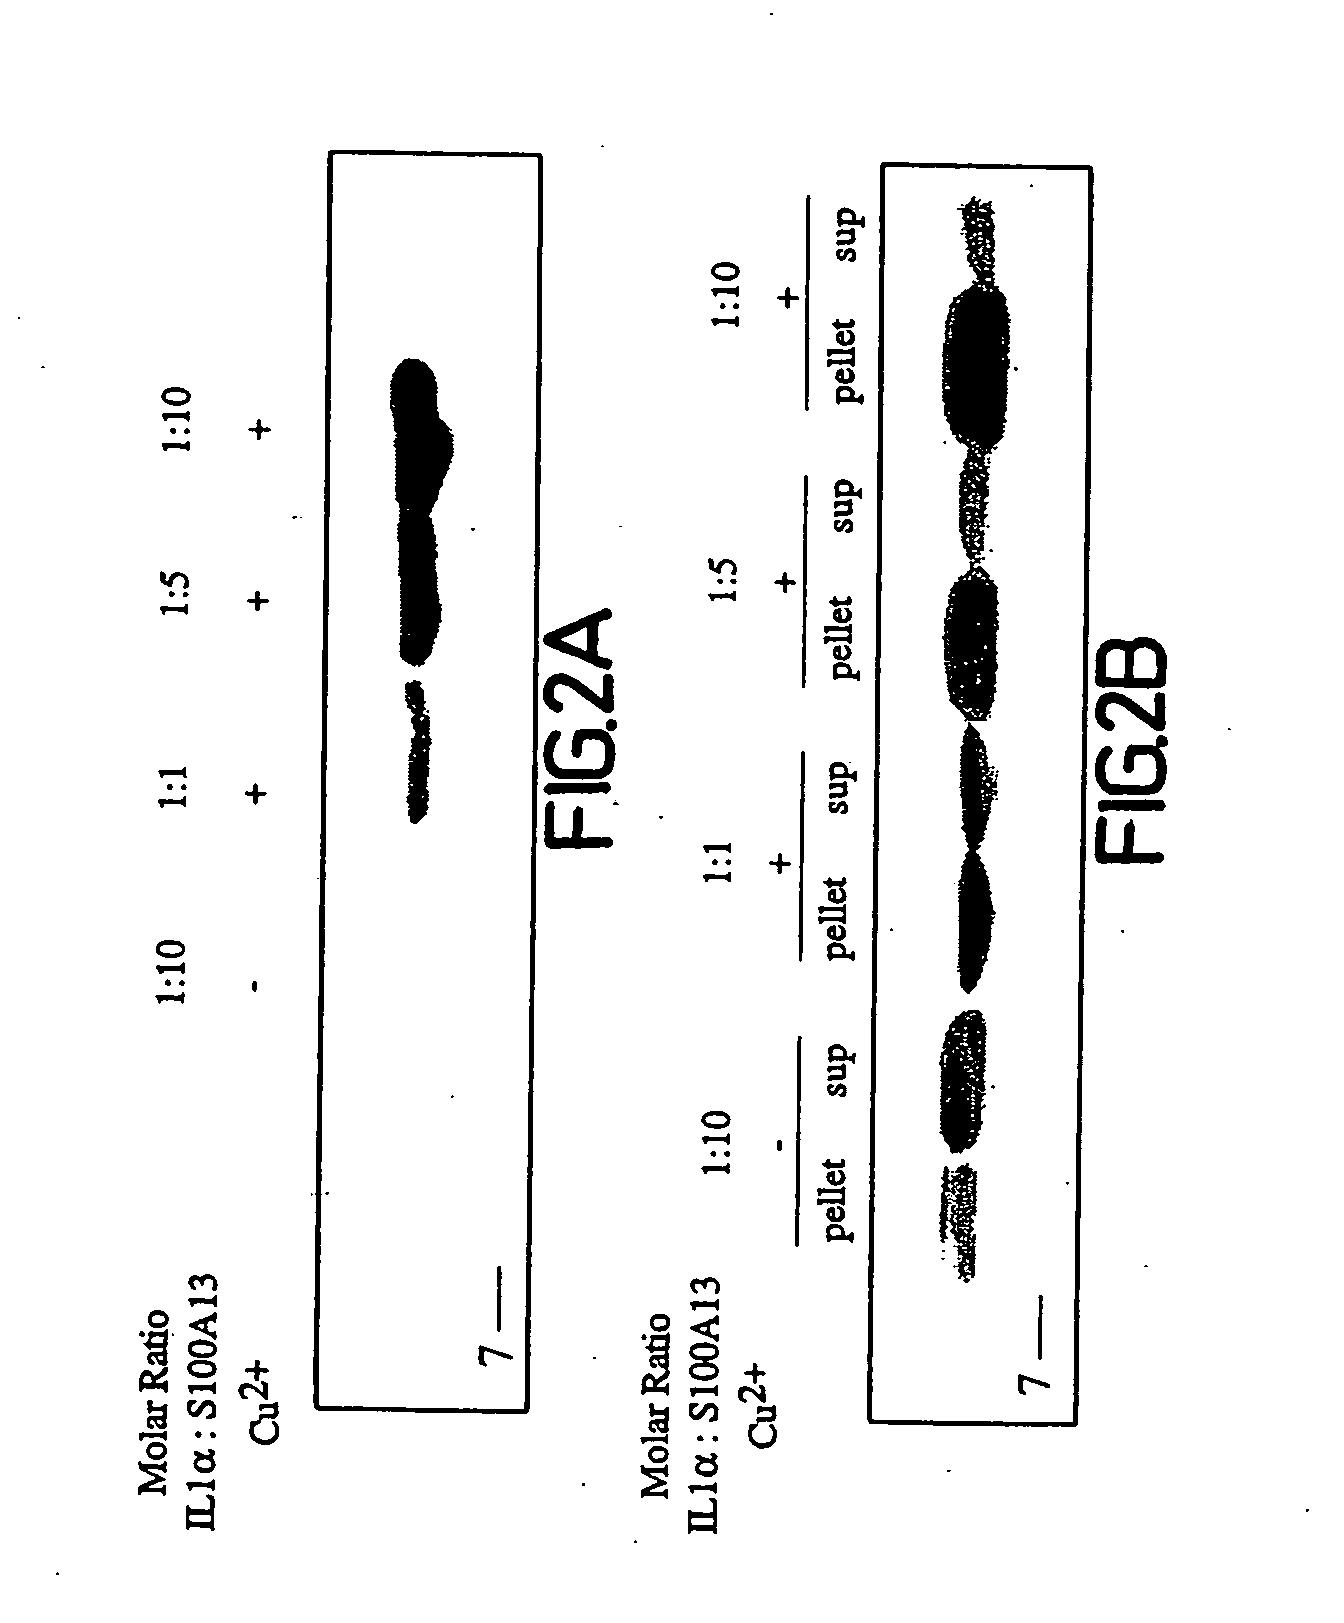 Copper-dependent non-traditional pro-inflammatory cytokine export and methods, compositions and kits relating thereto